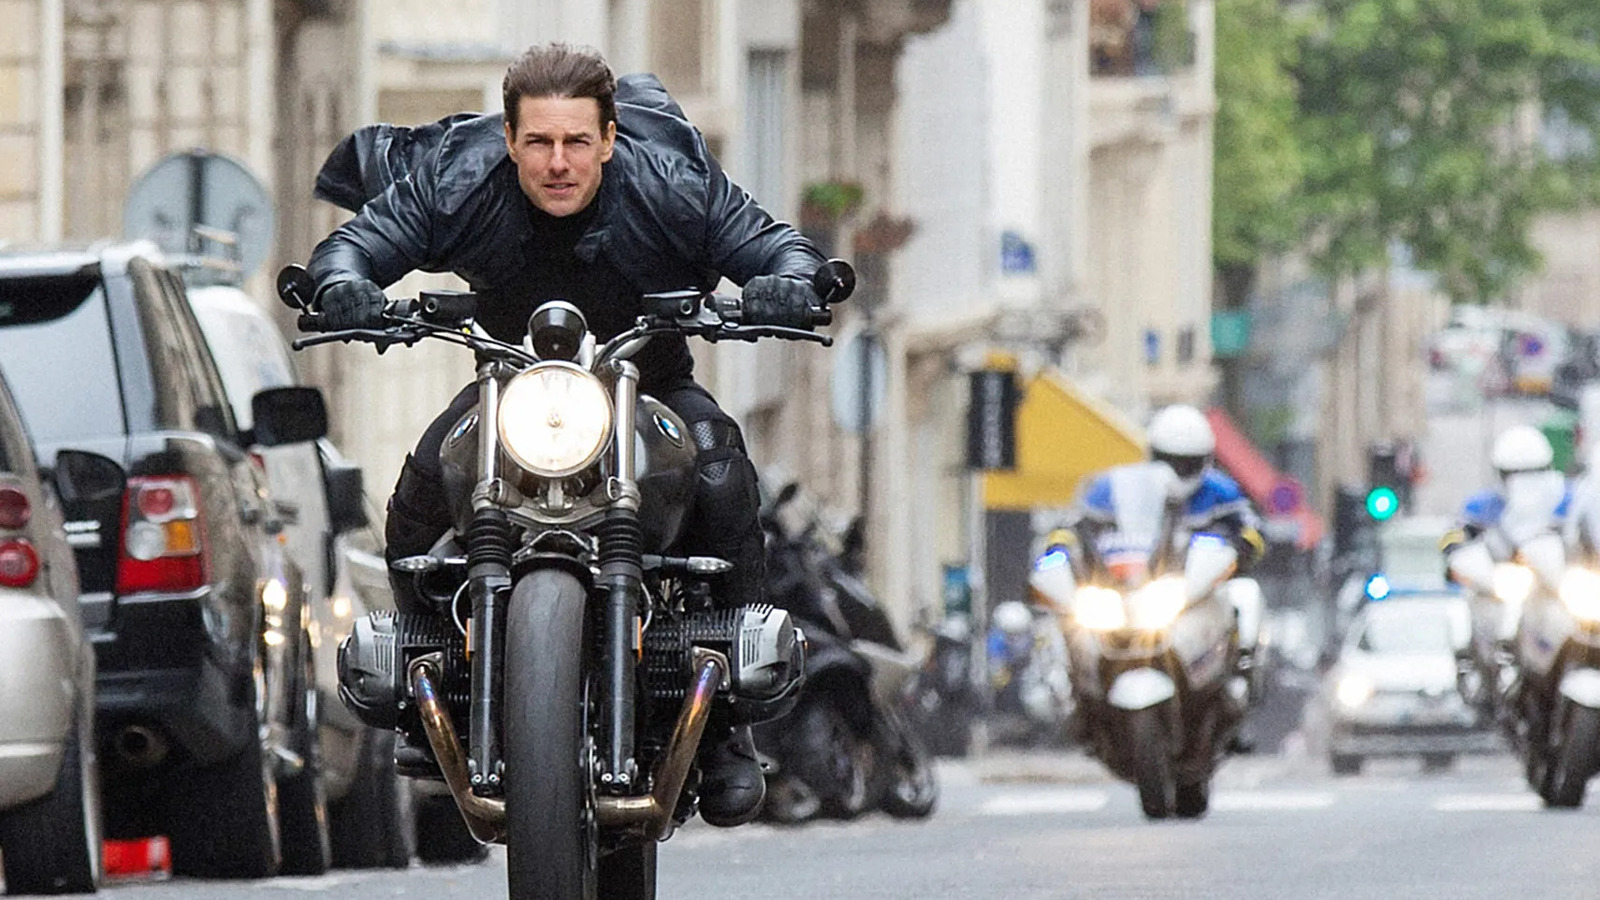 Blonde Hair Motorcycle Chase in Mission Impossible - wide 7